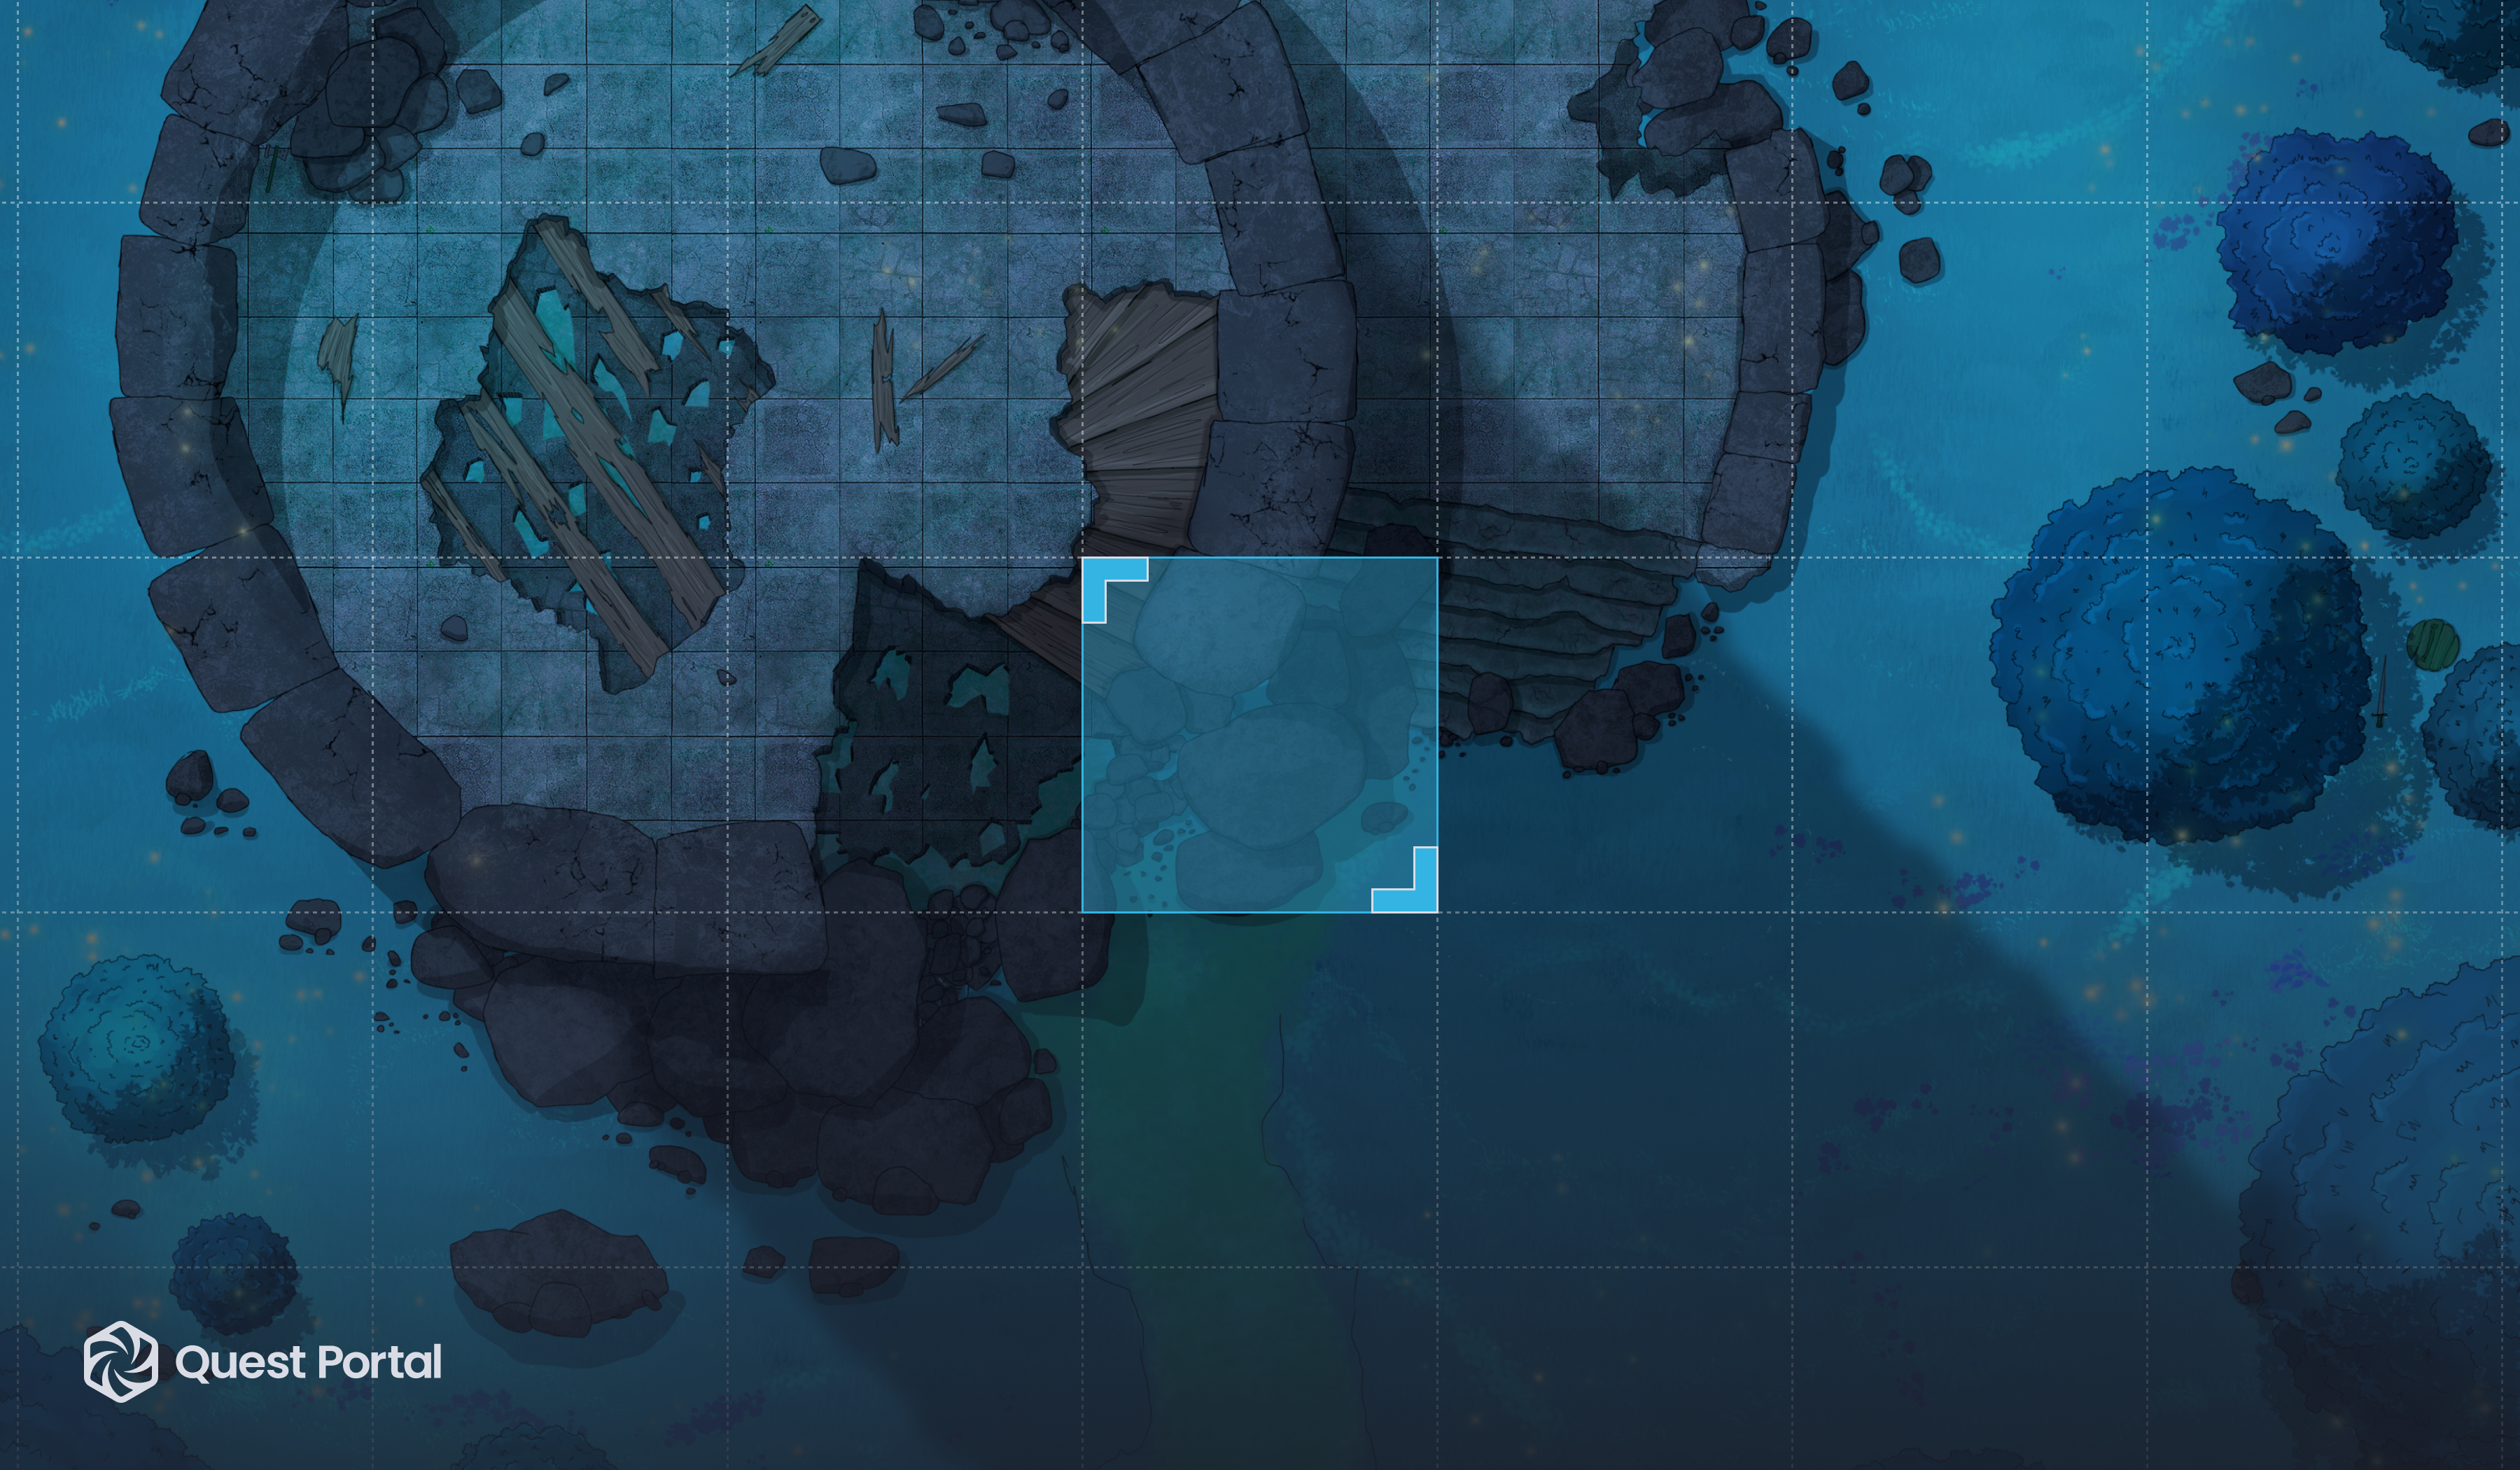 A battlemap showing a round tower. A blue box indicates the editable grid size.